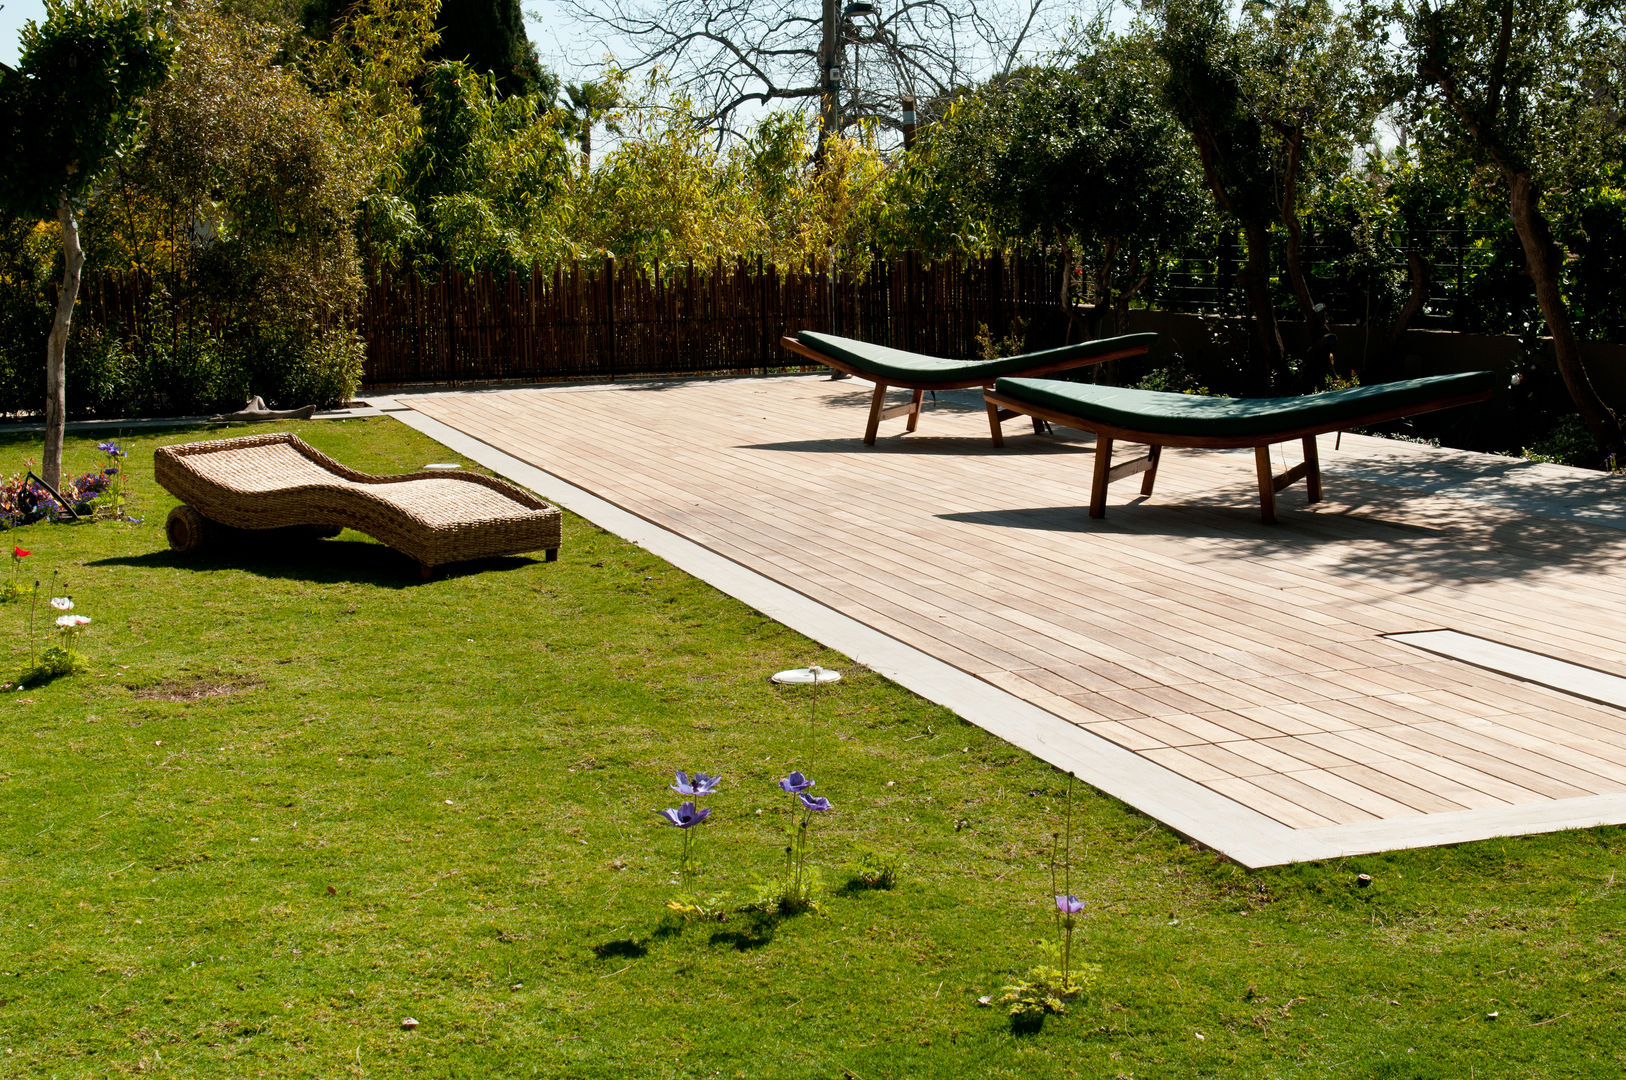 Wood deck Covered Movable Floor, AGOR Engineering AGOR Engineering 모던스타일 수영장